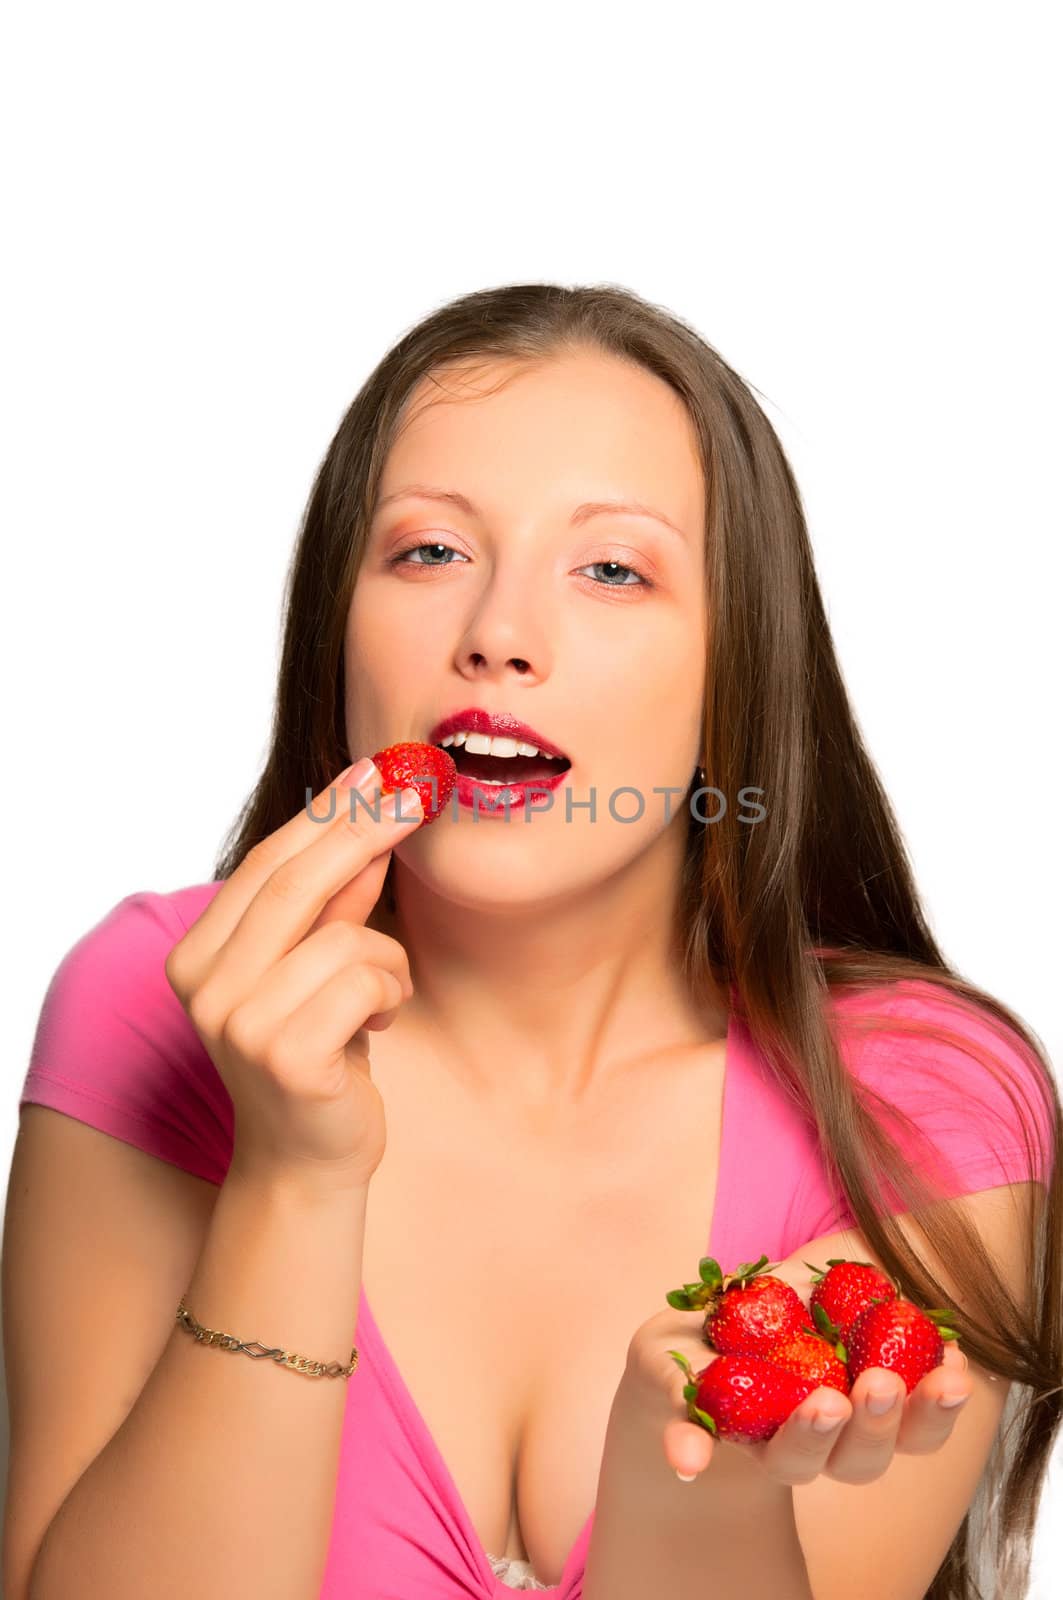 The girl with strawberry 2 by ben44